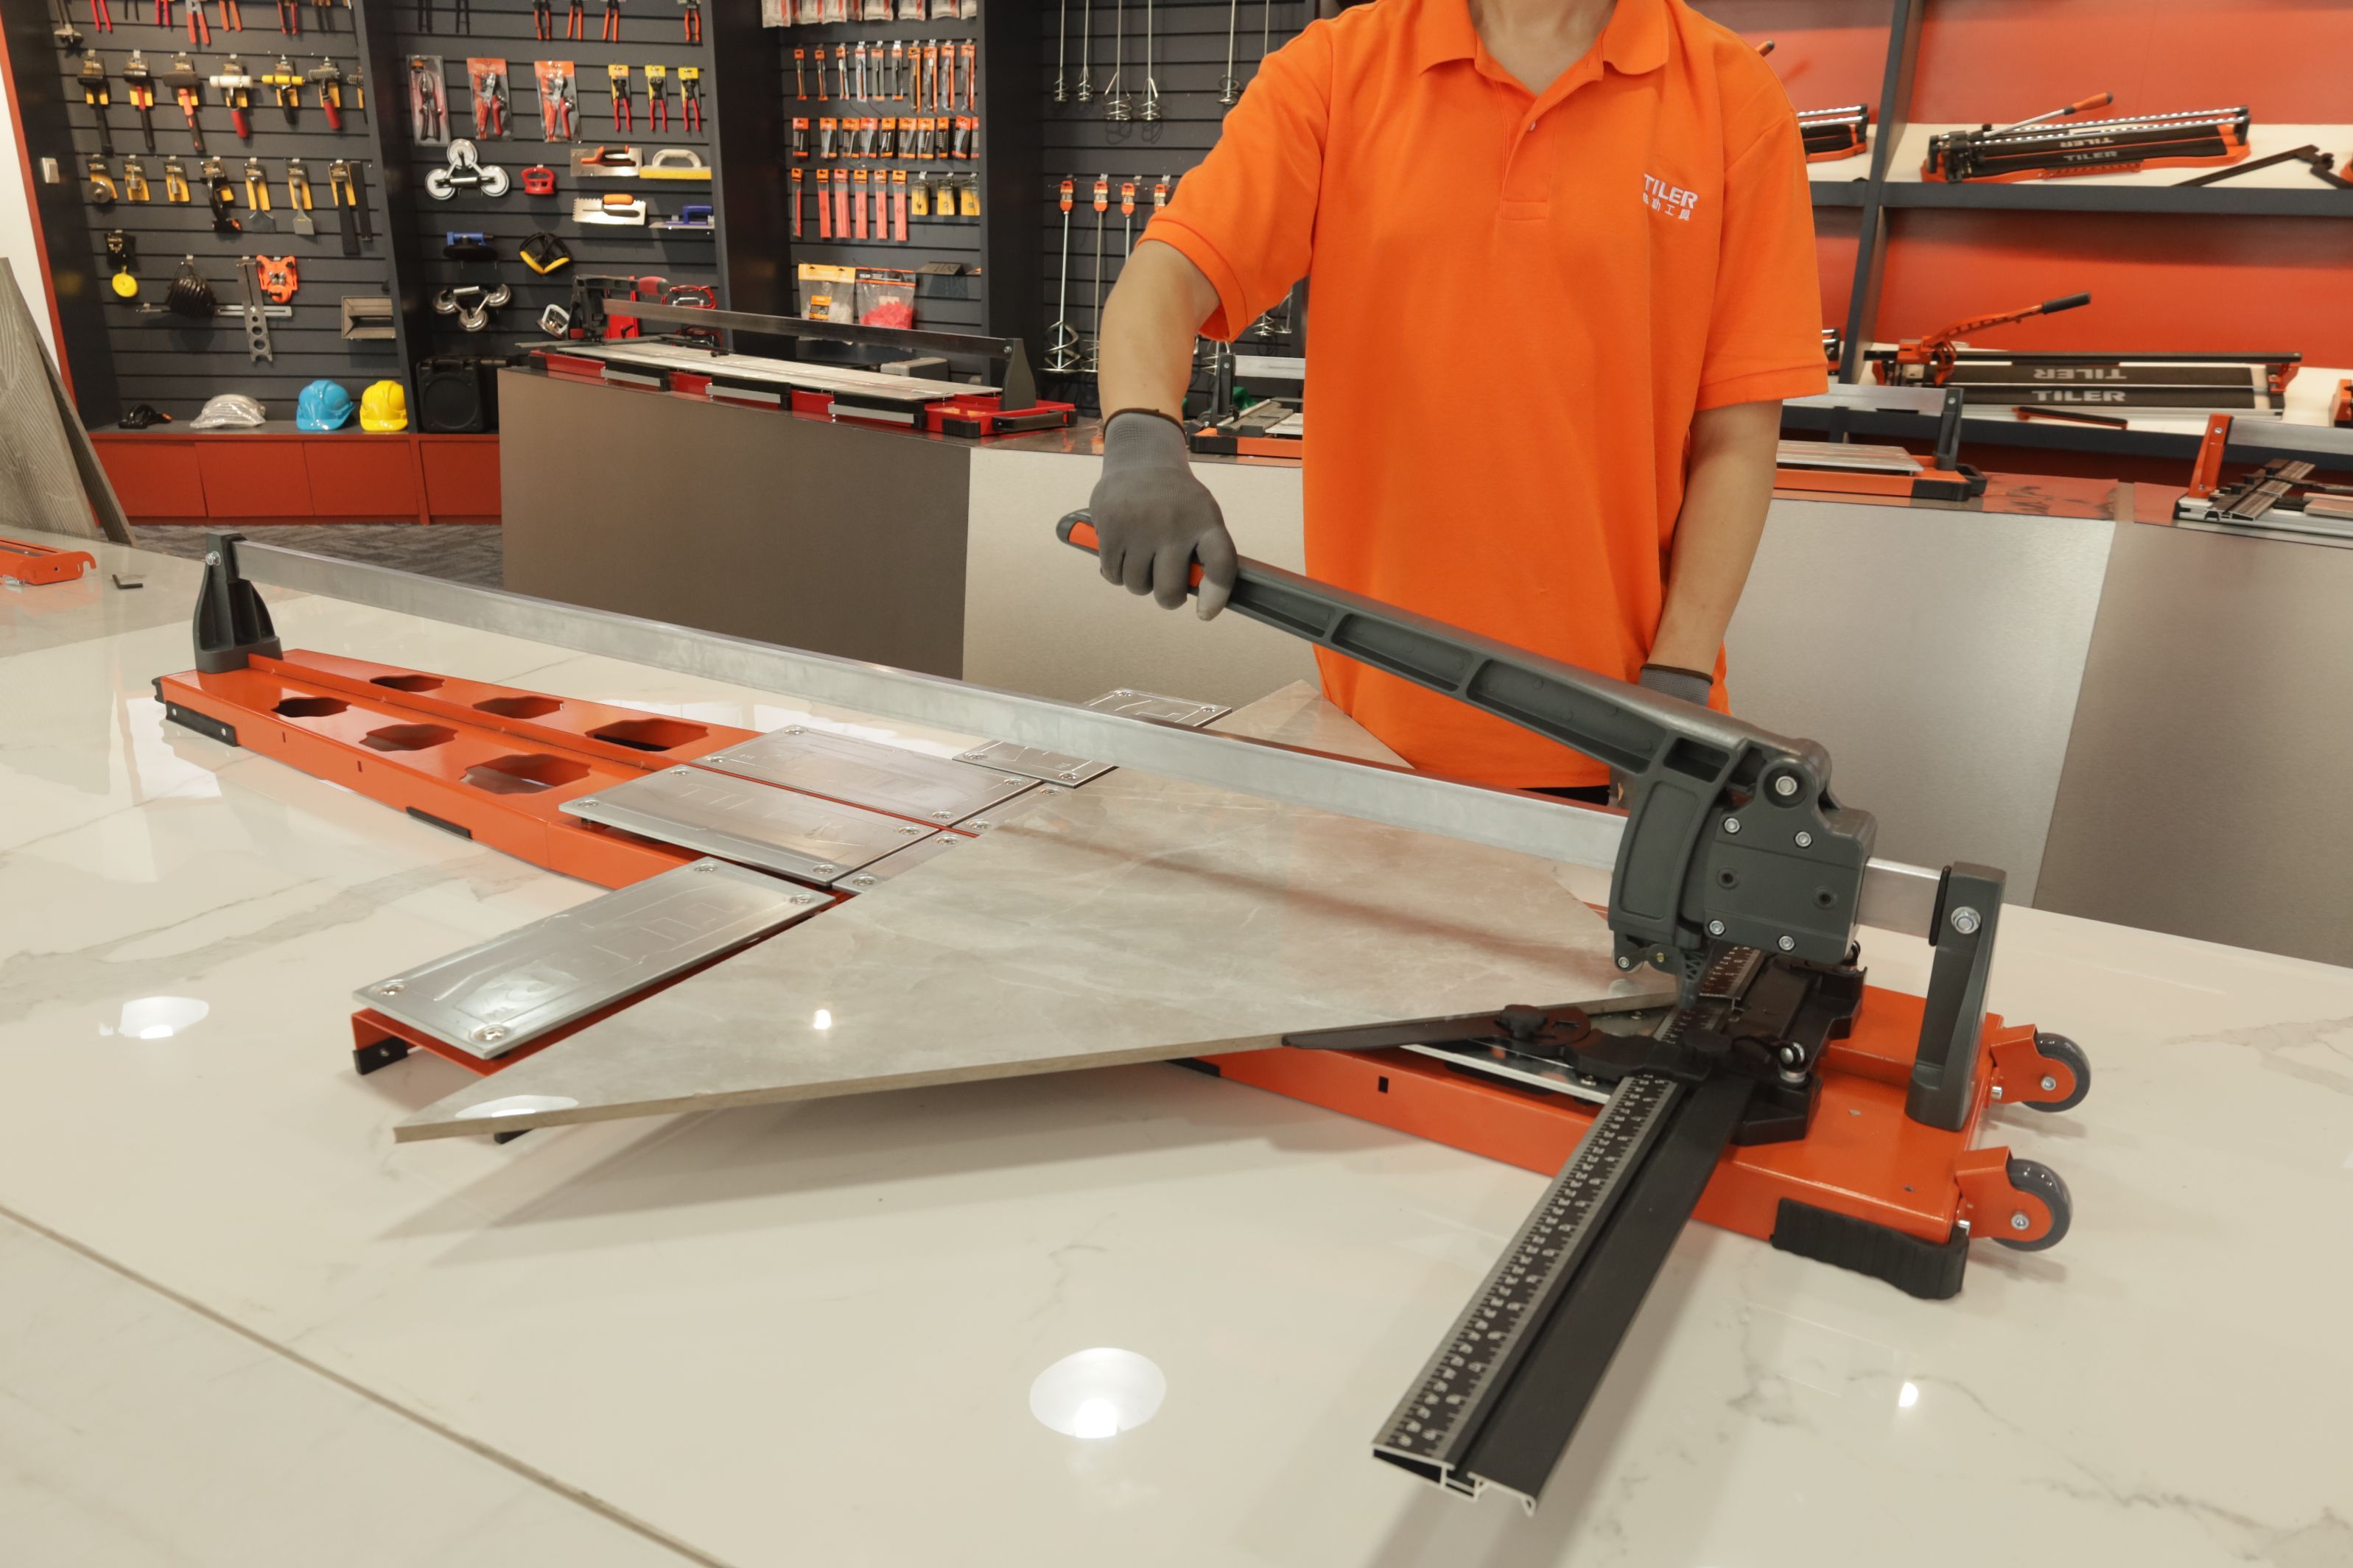 Redefining Durability: Materials and Construction of New Generation Tile Cutters